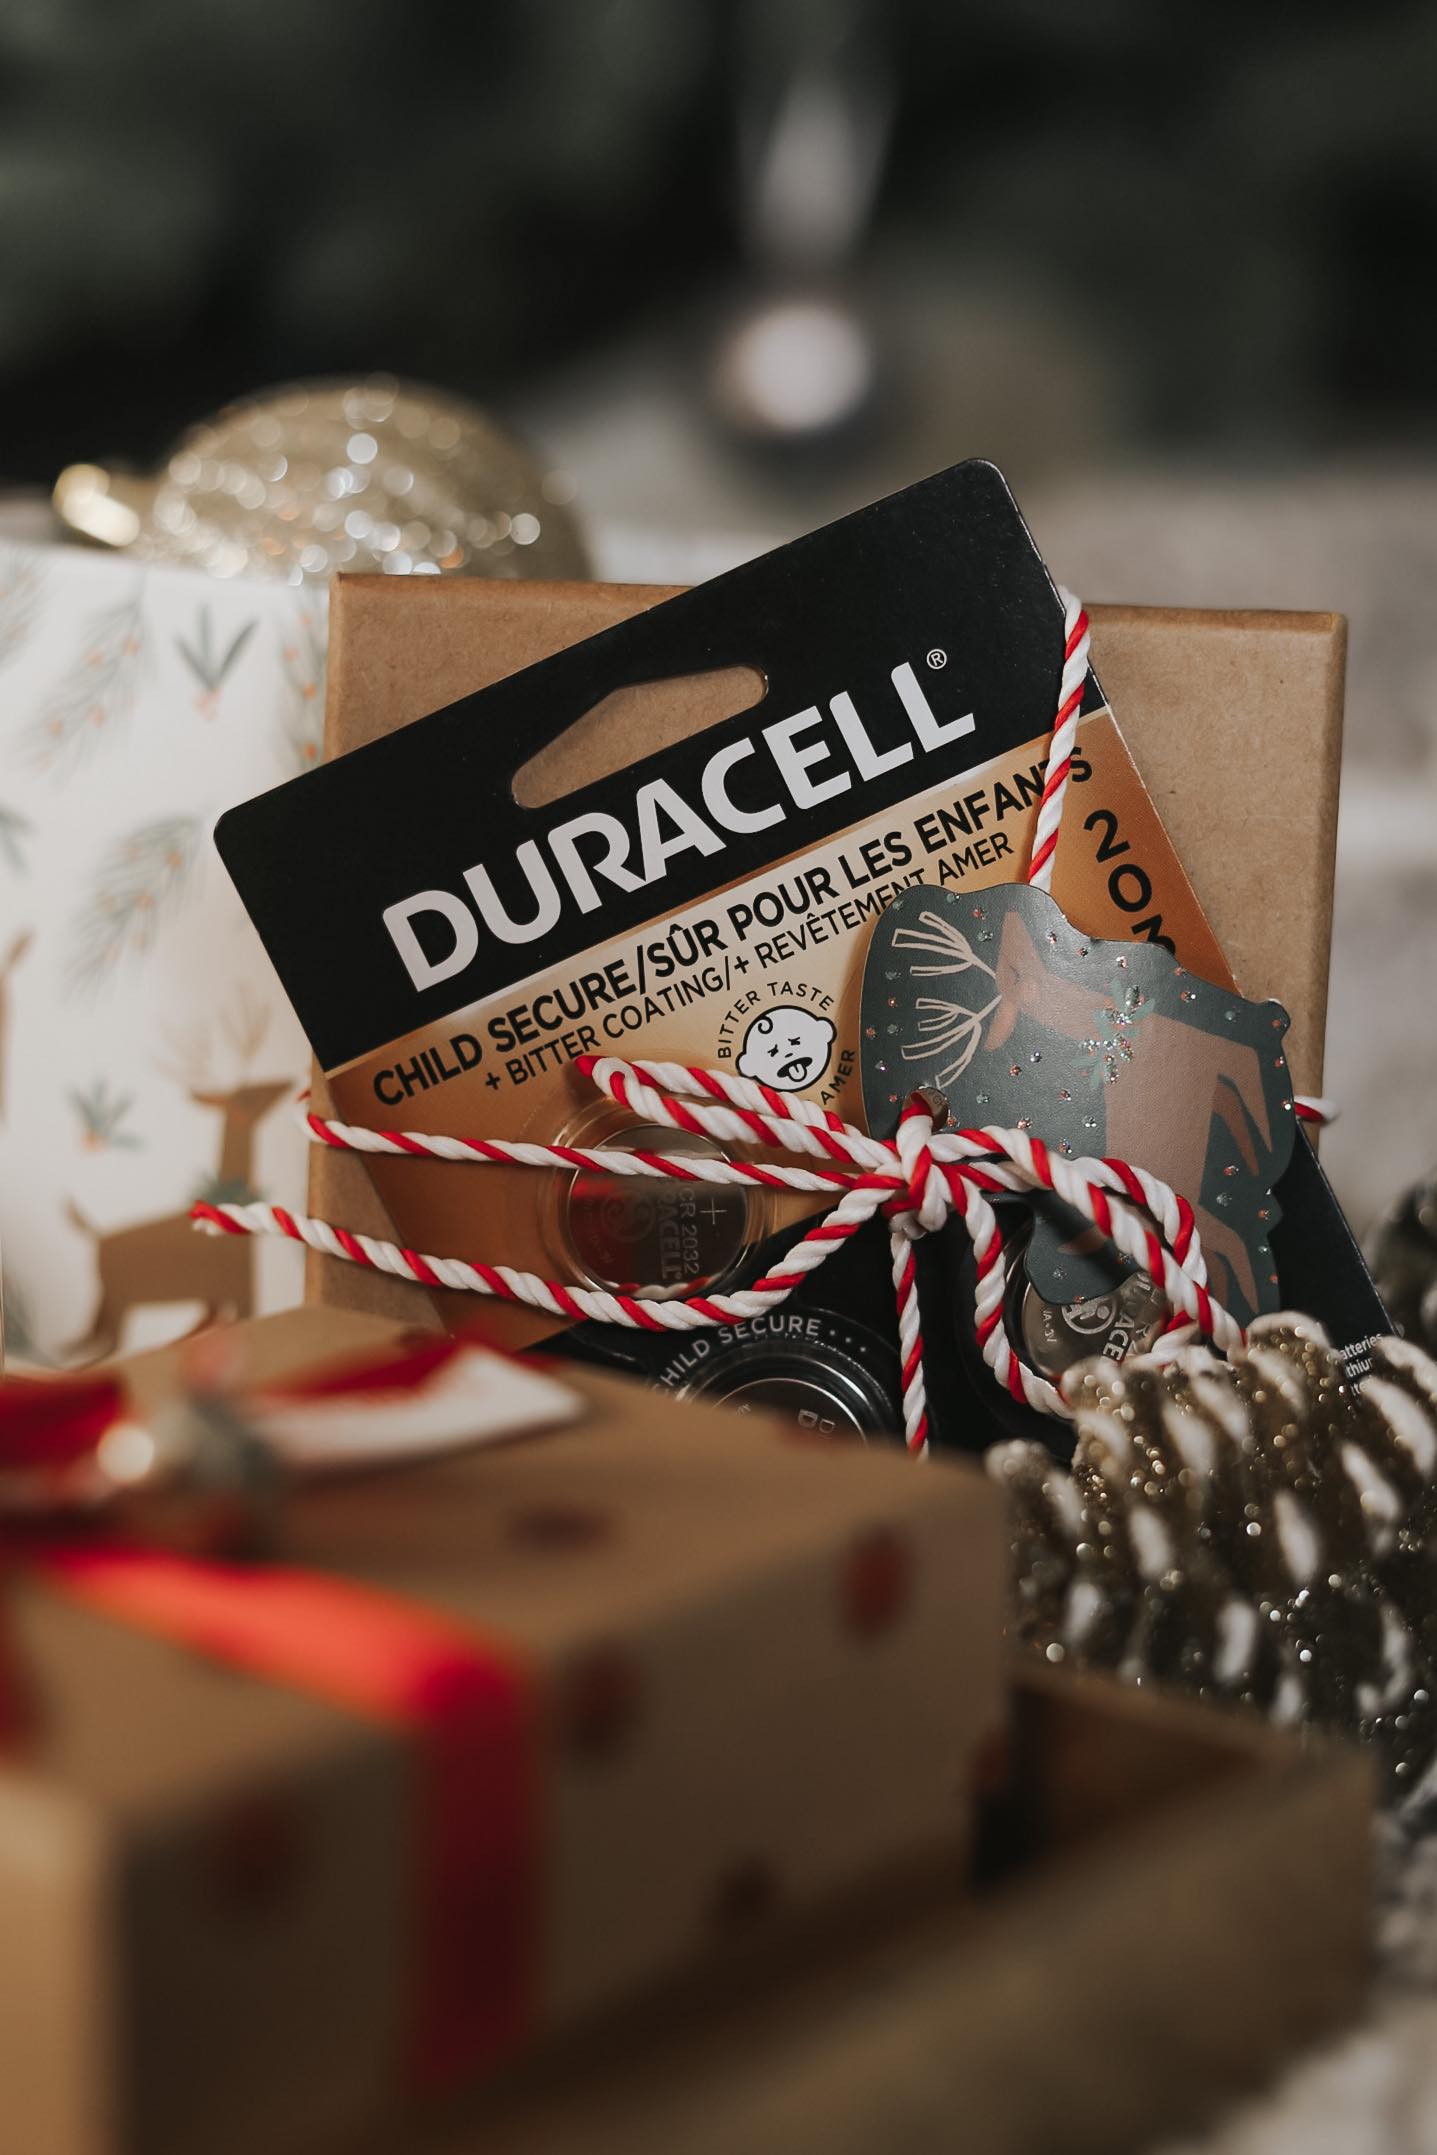 How to Keep Your Family Safe with Duracell Lithium Coin Battery